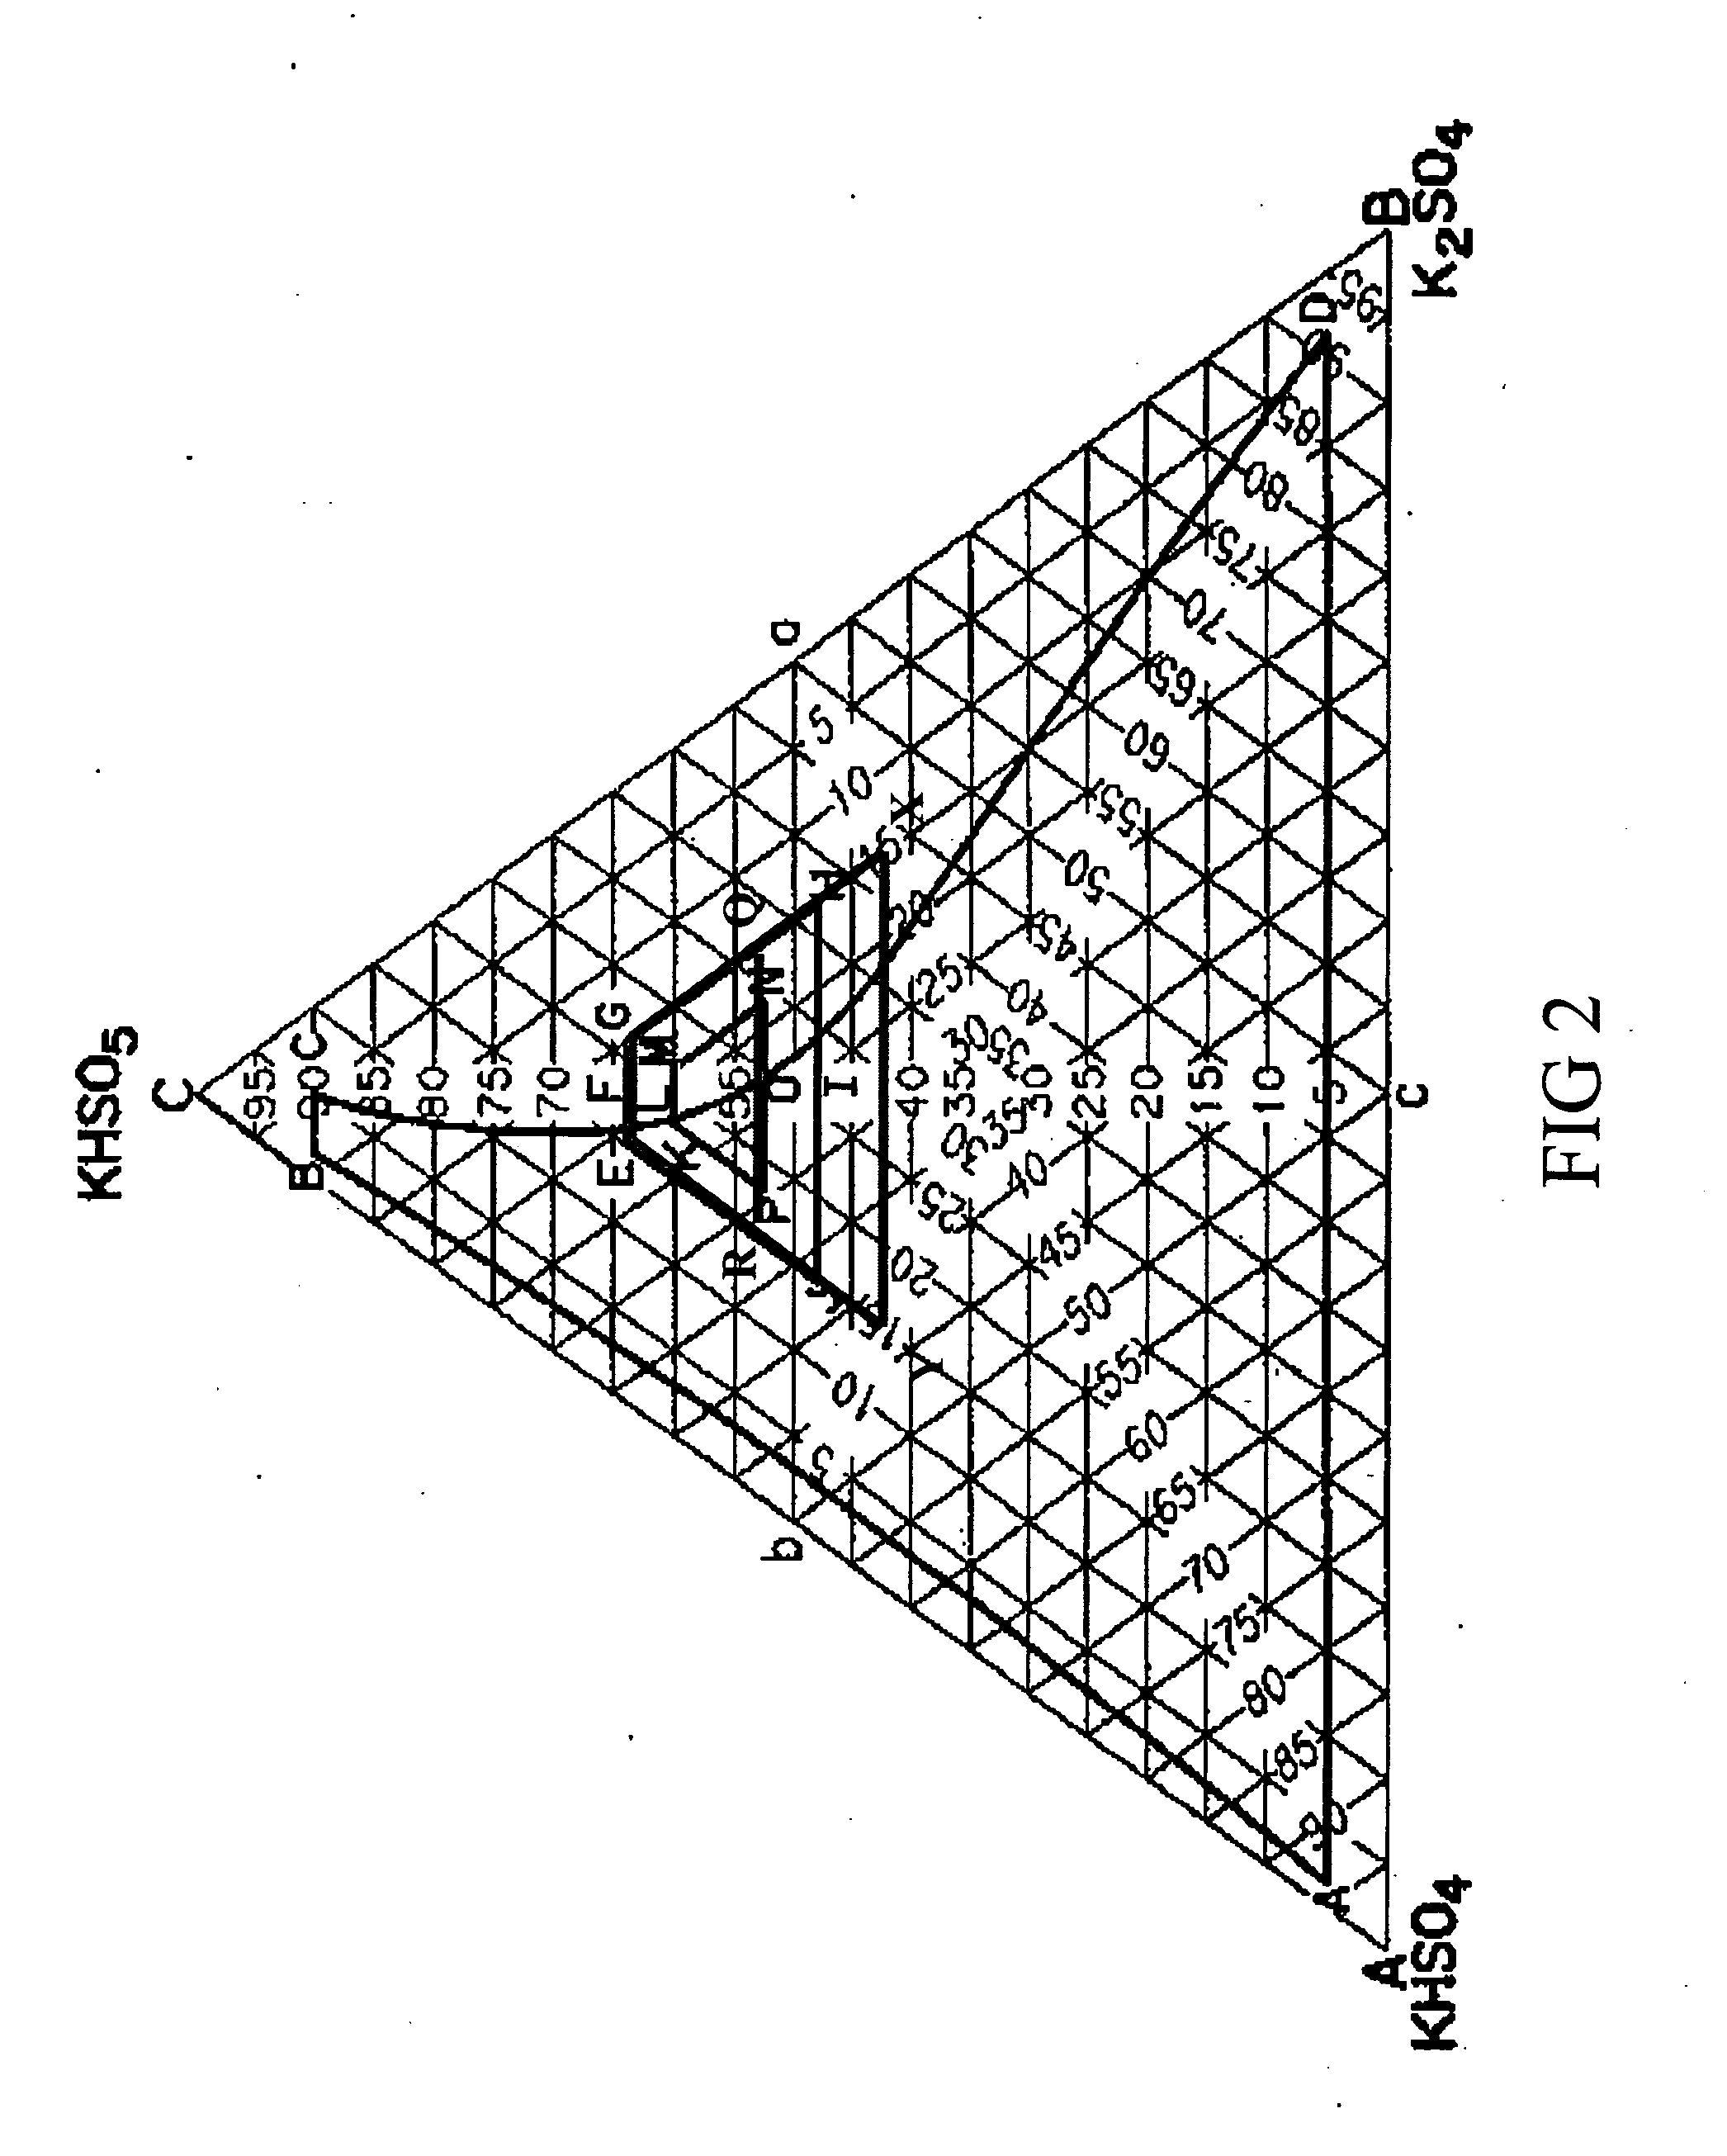 Method and apparatus for producing a peroxyacid solution